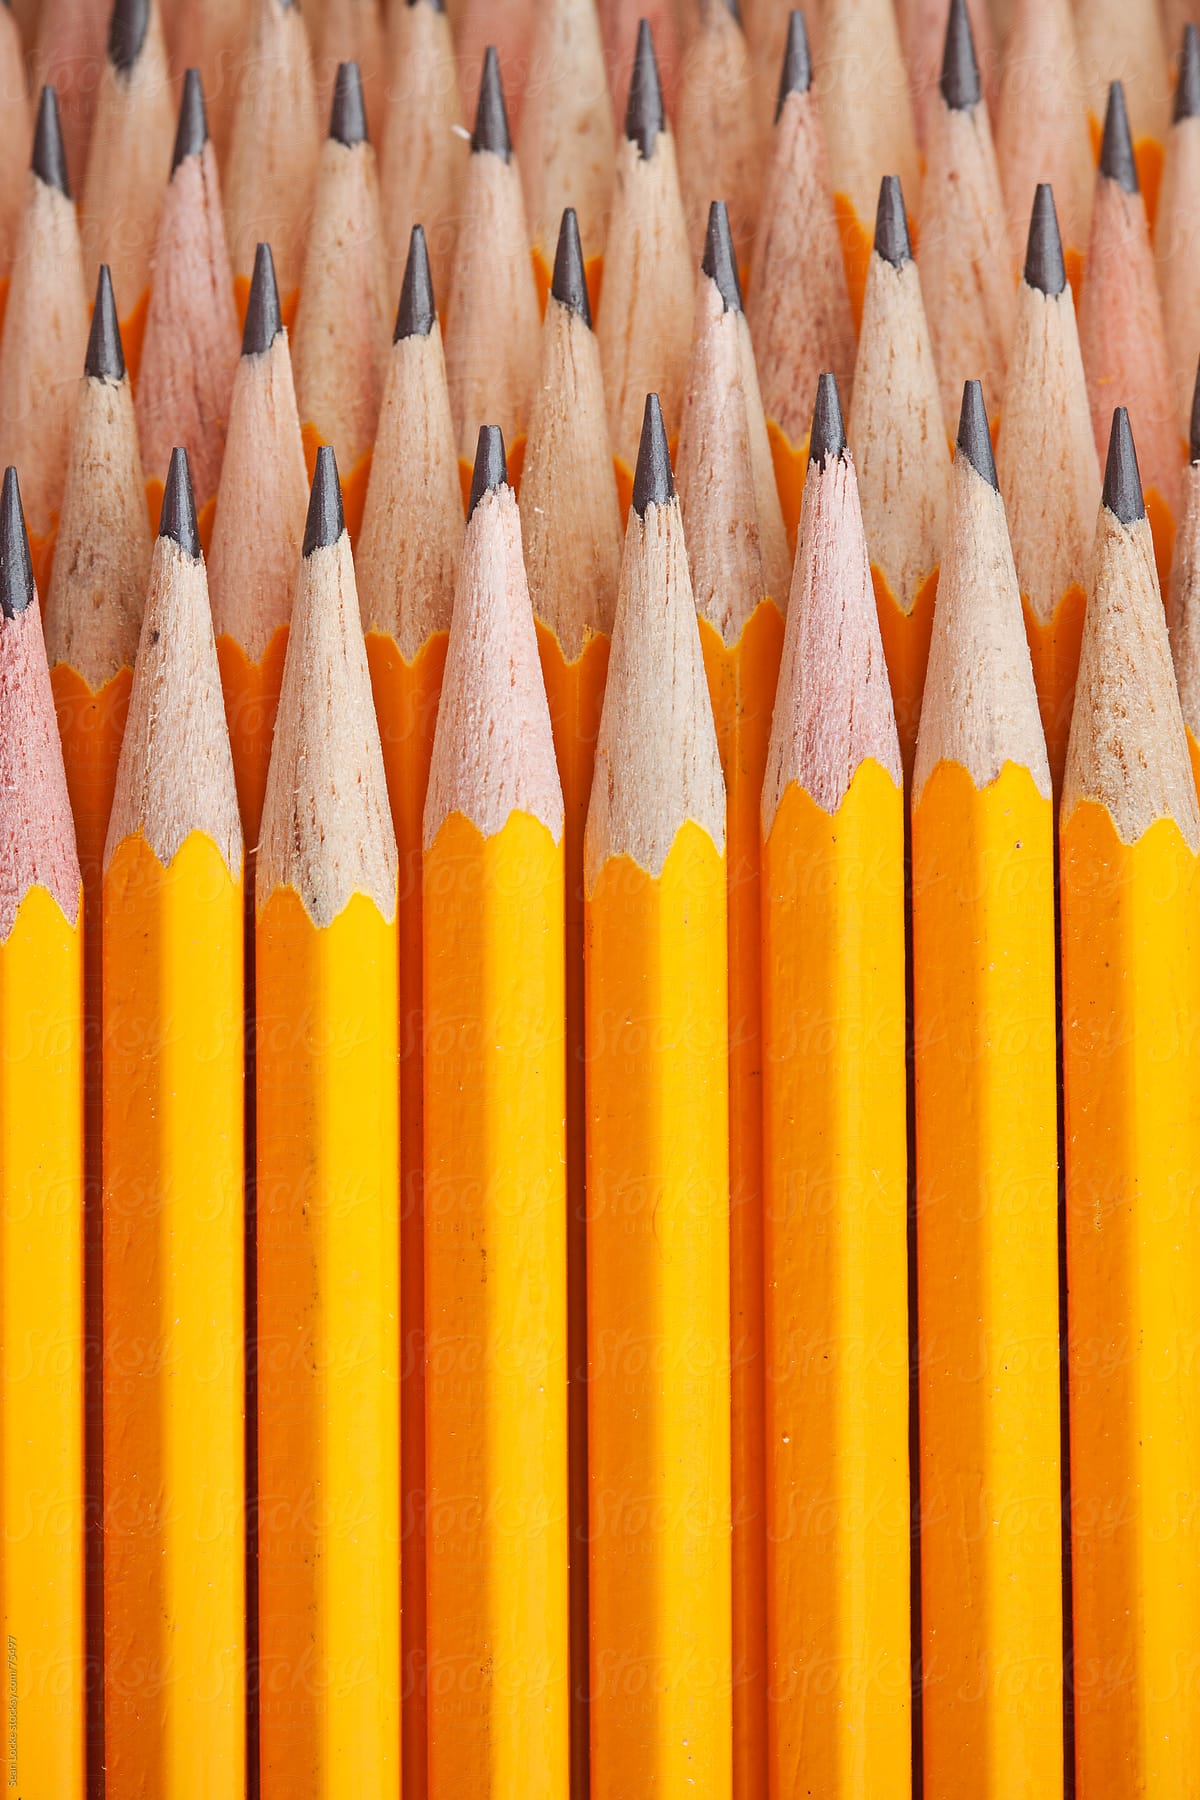 Pencils: Pencils Stacked in Pattern